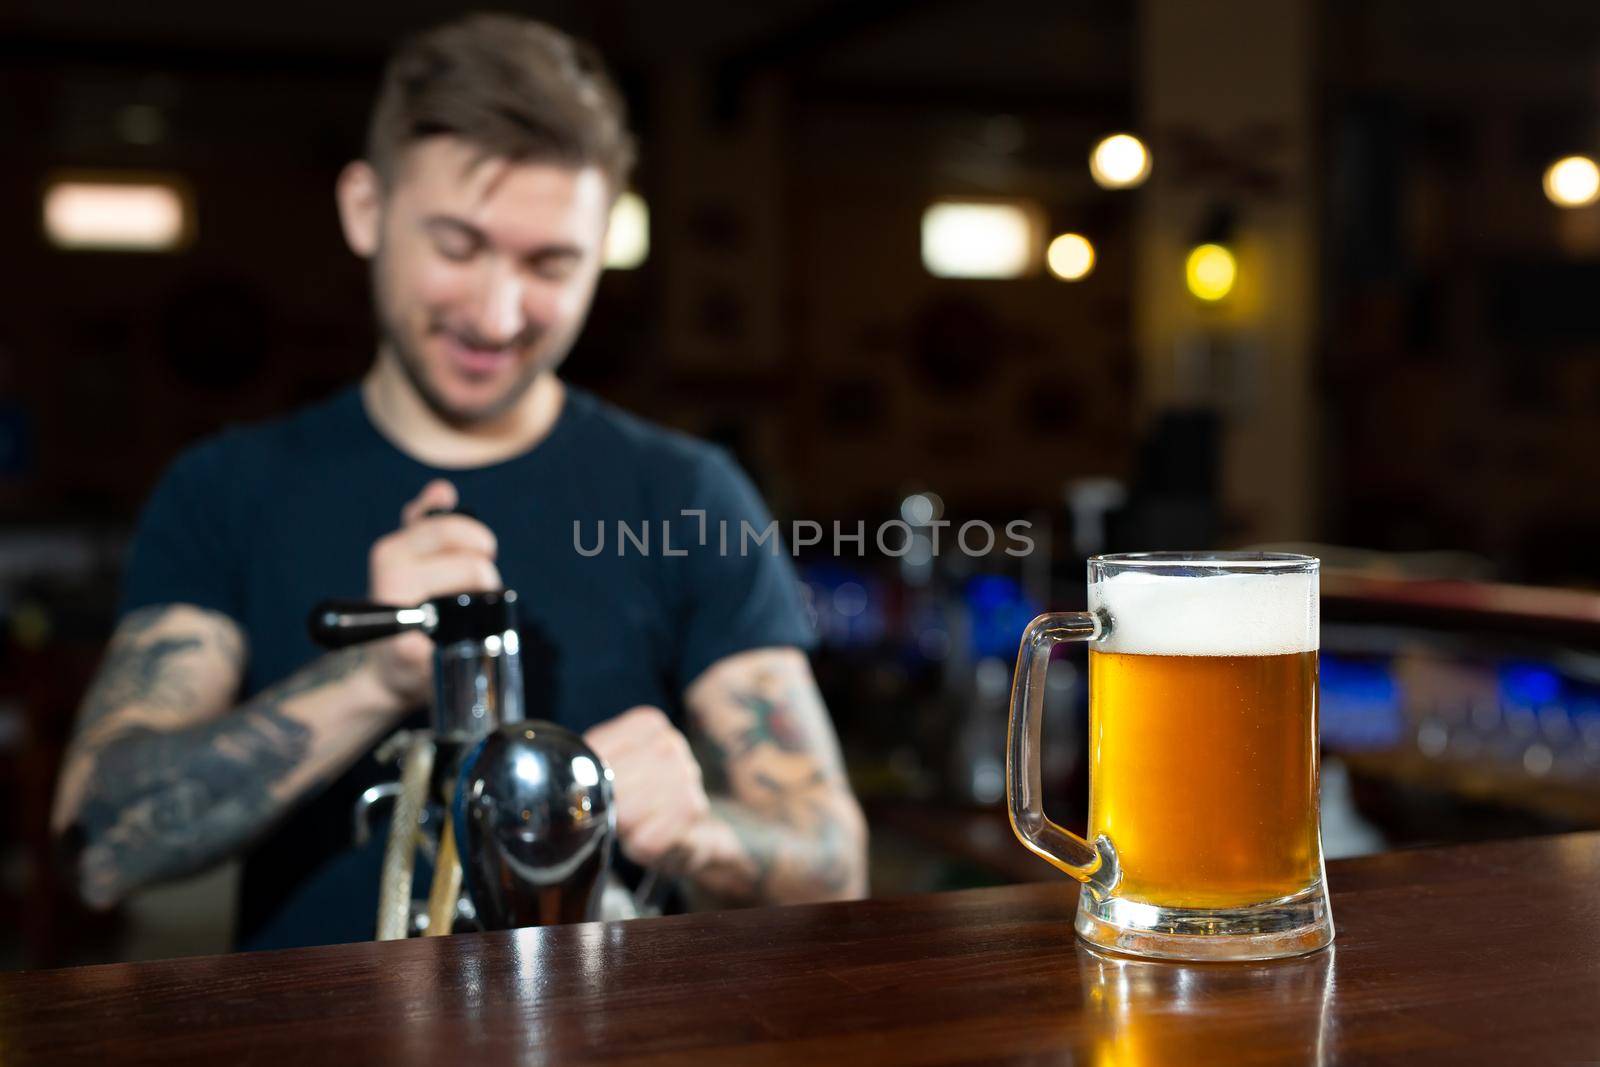 Bartender pouring from tap fresh beer into the glass in pub